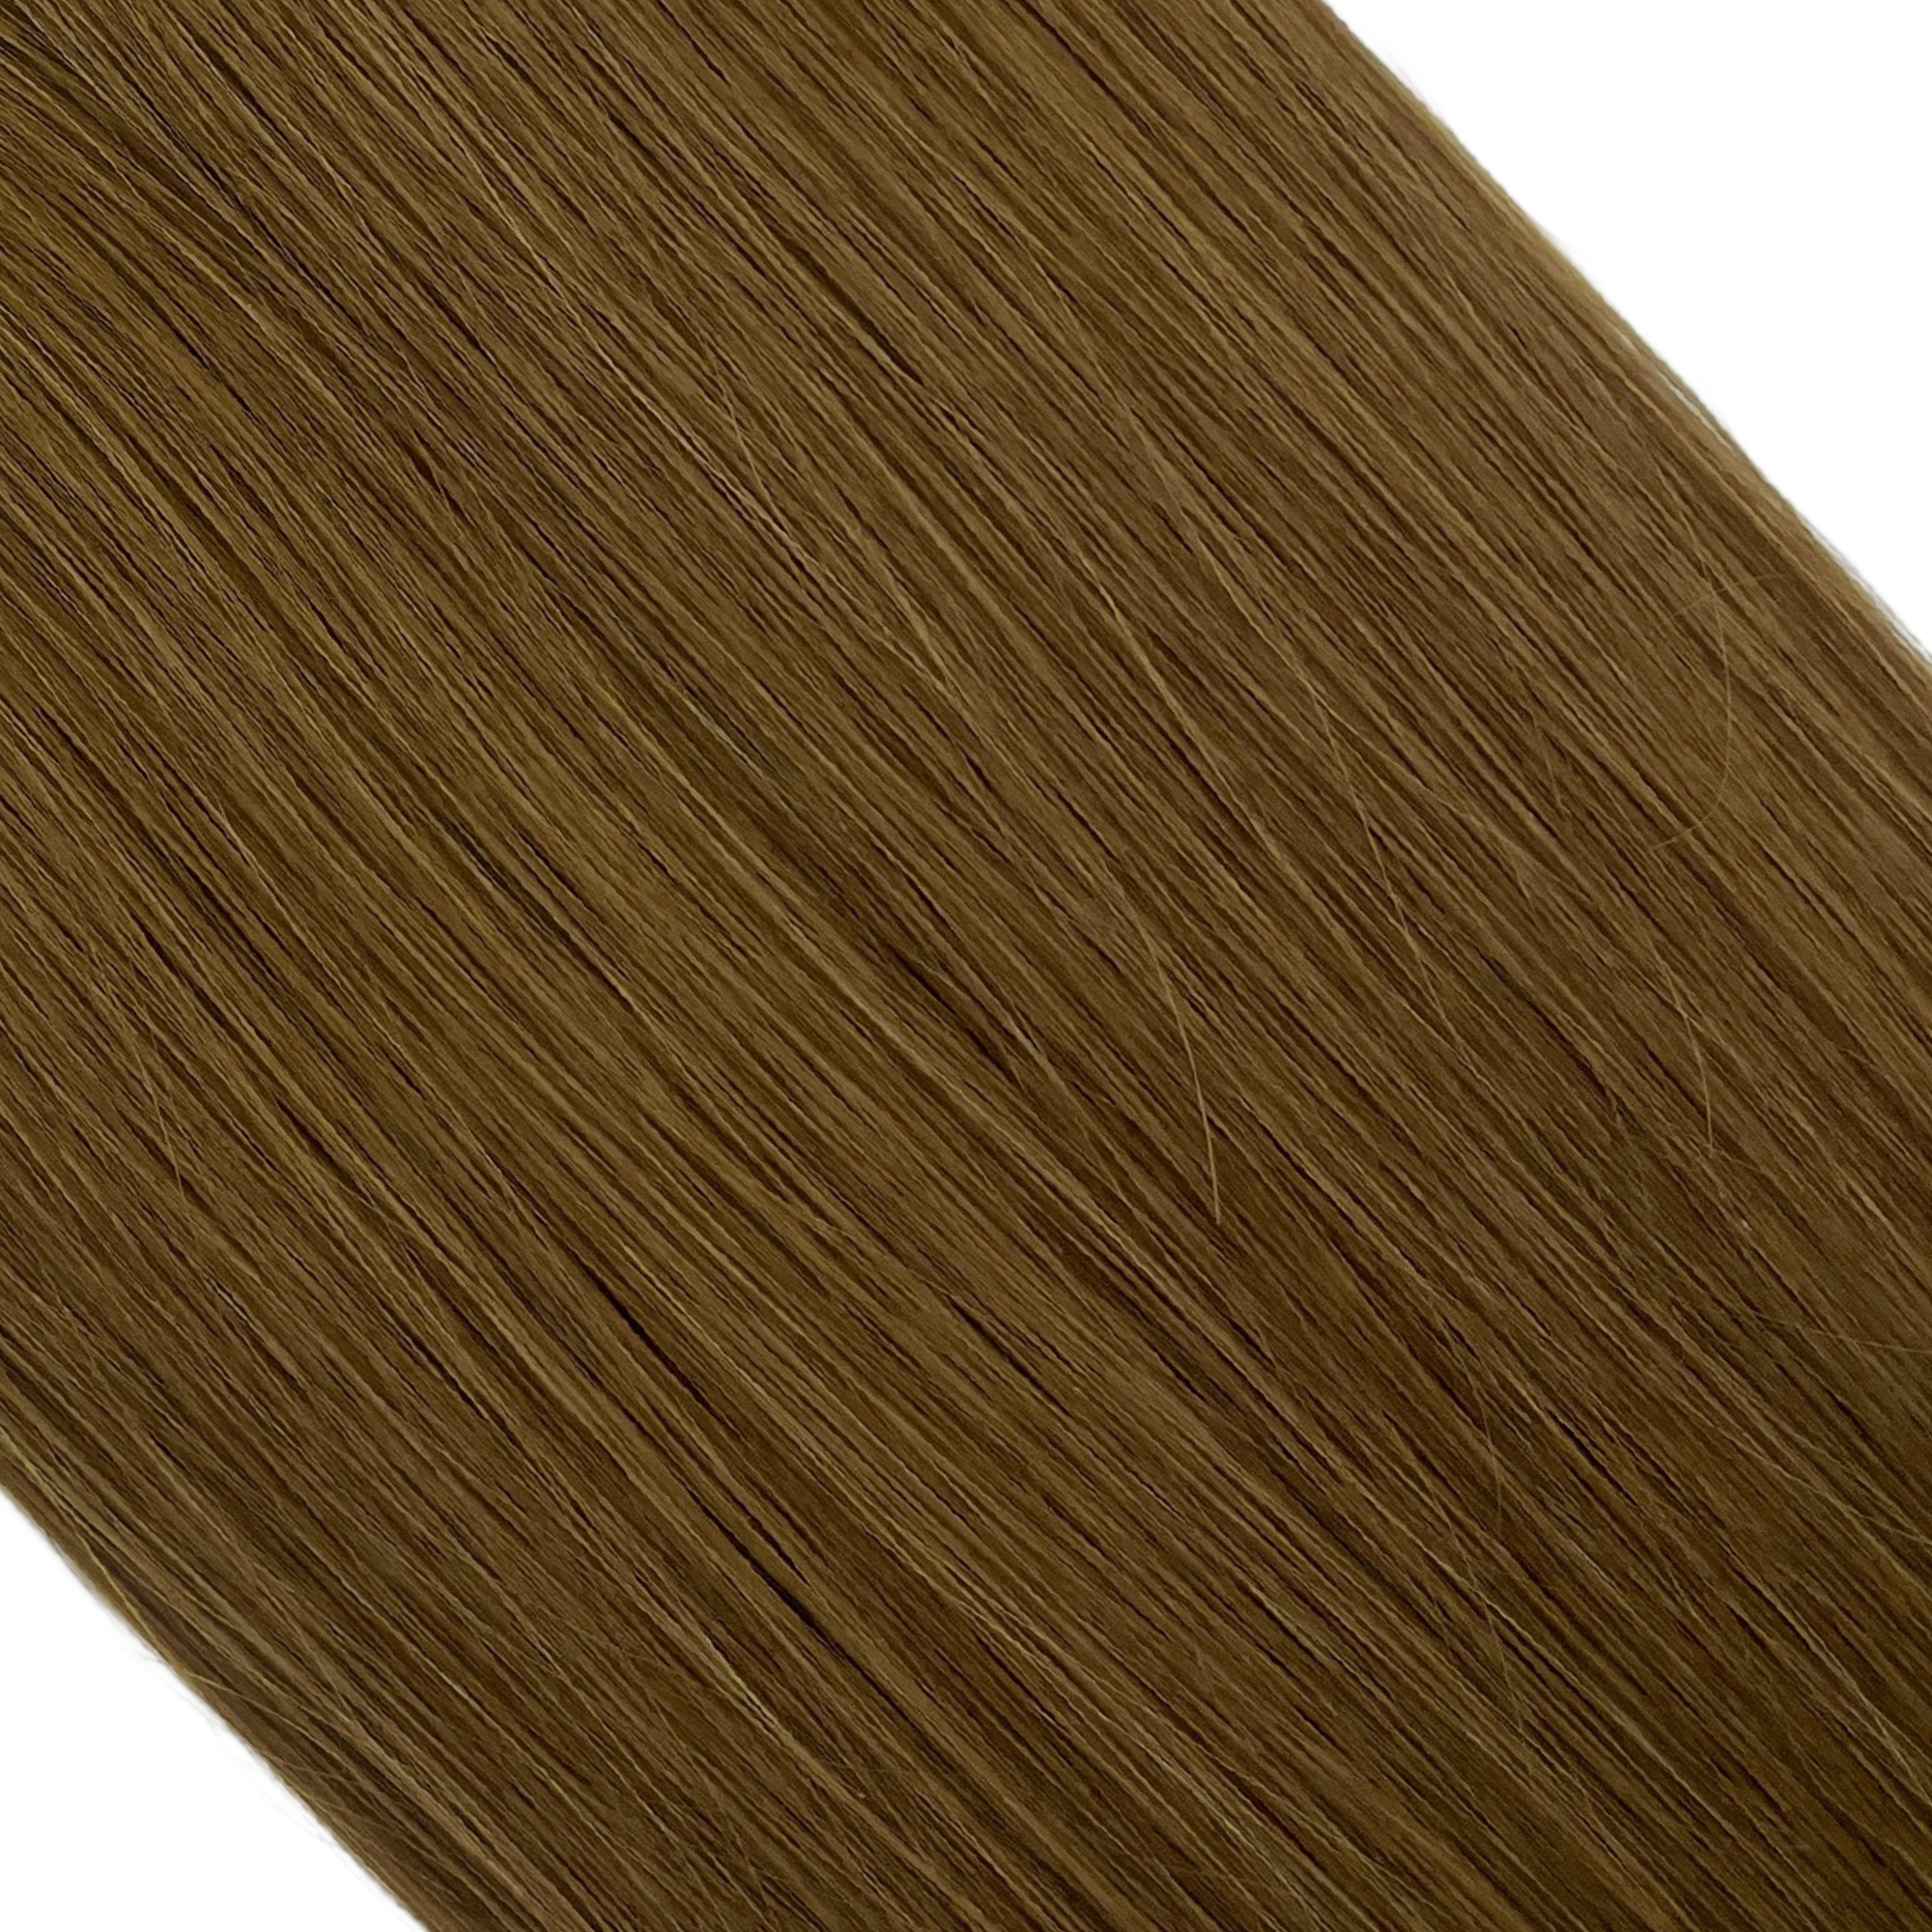 "hair rehab london 22" weft hair extensions shade swatch titled hollywood hottie"